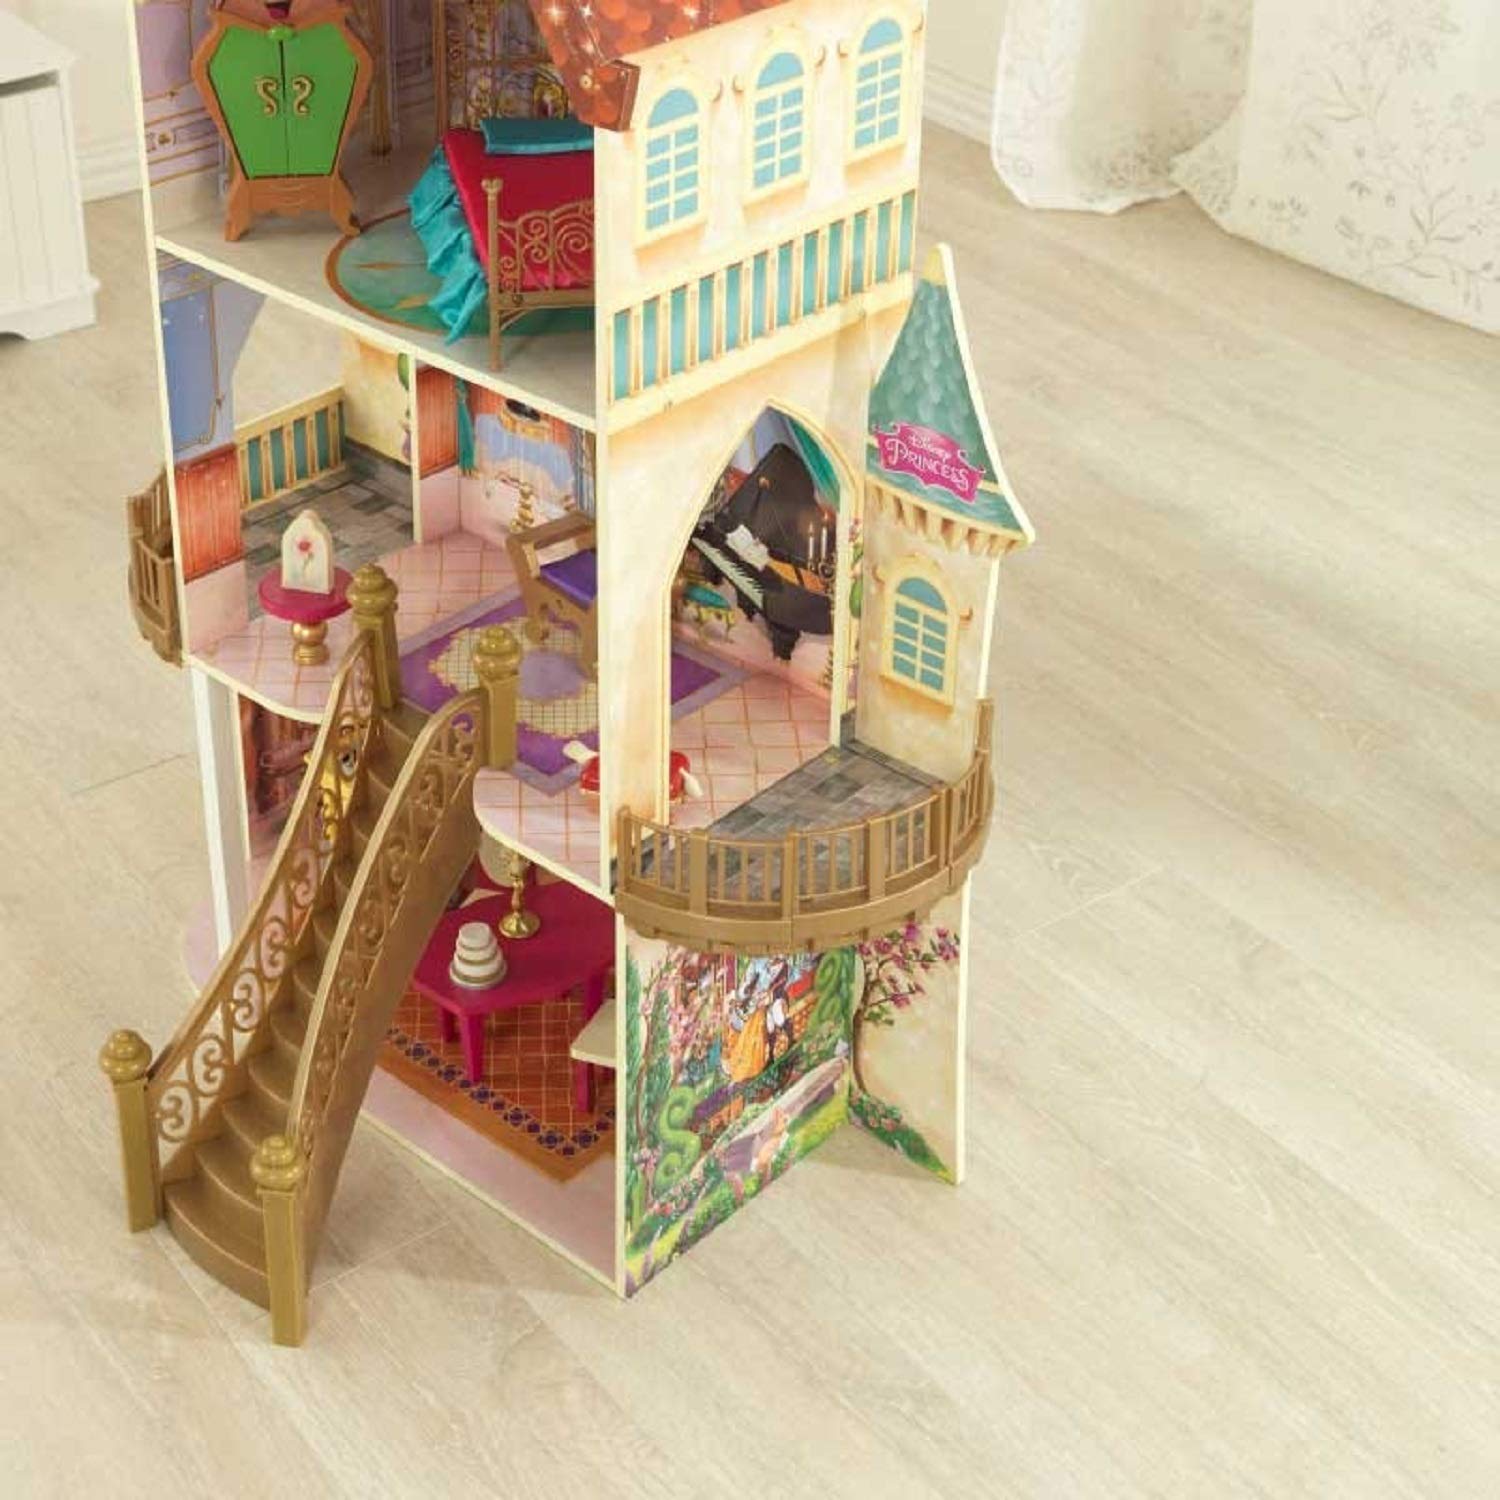 KidKraft Disney Princess Belle Enchanted Wooden Dollhouse, Almost Four Feet Tall, with Balconies, Staircase and 13 Accessories, Gift for Ages 3+